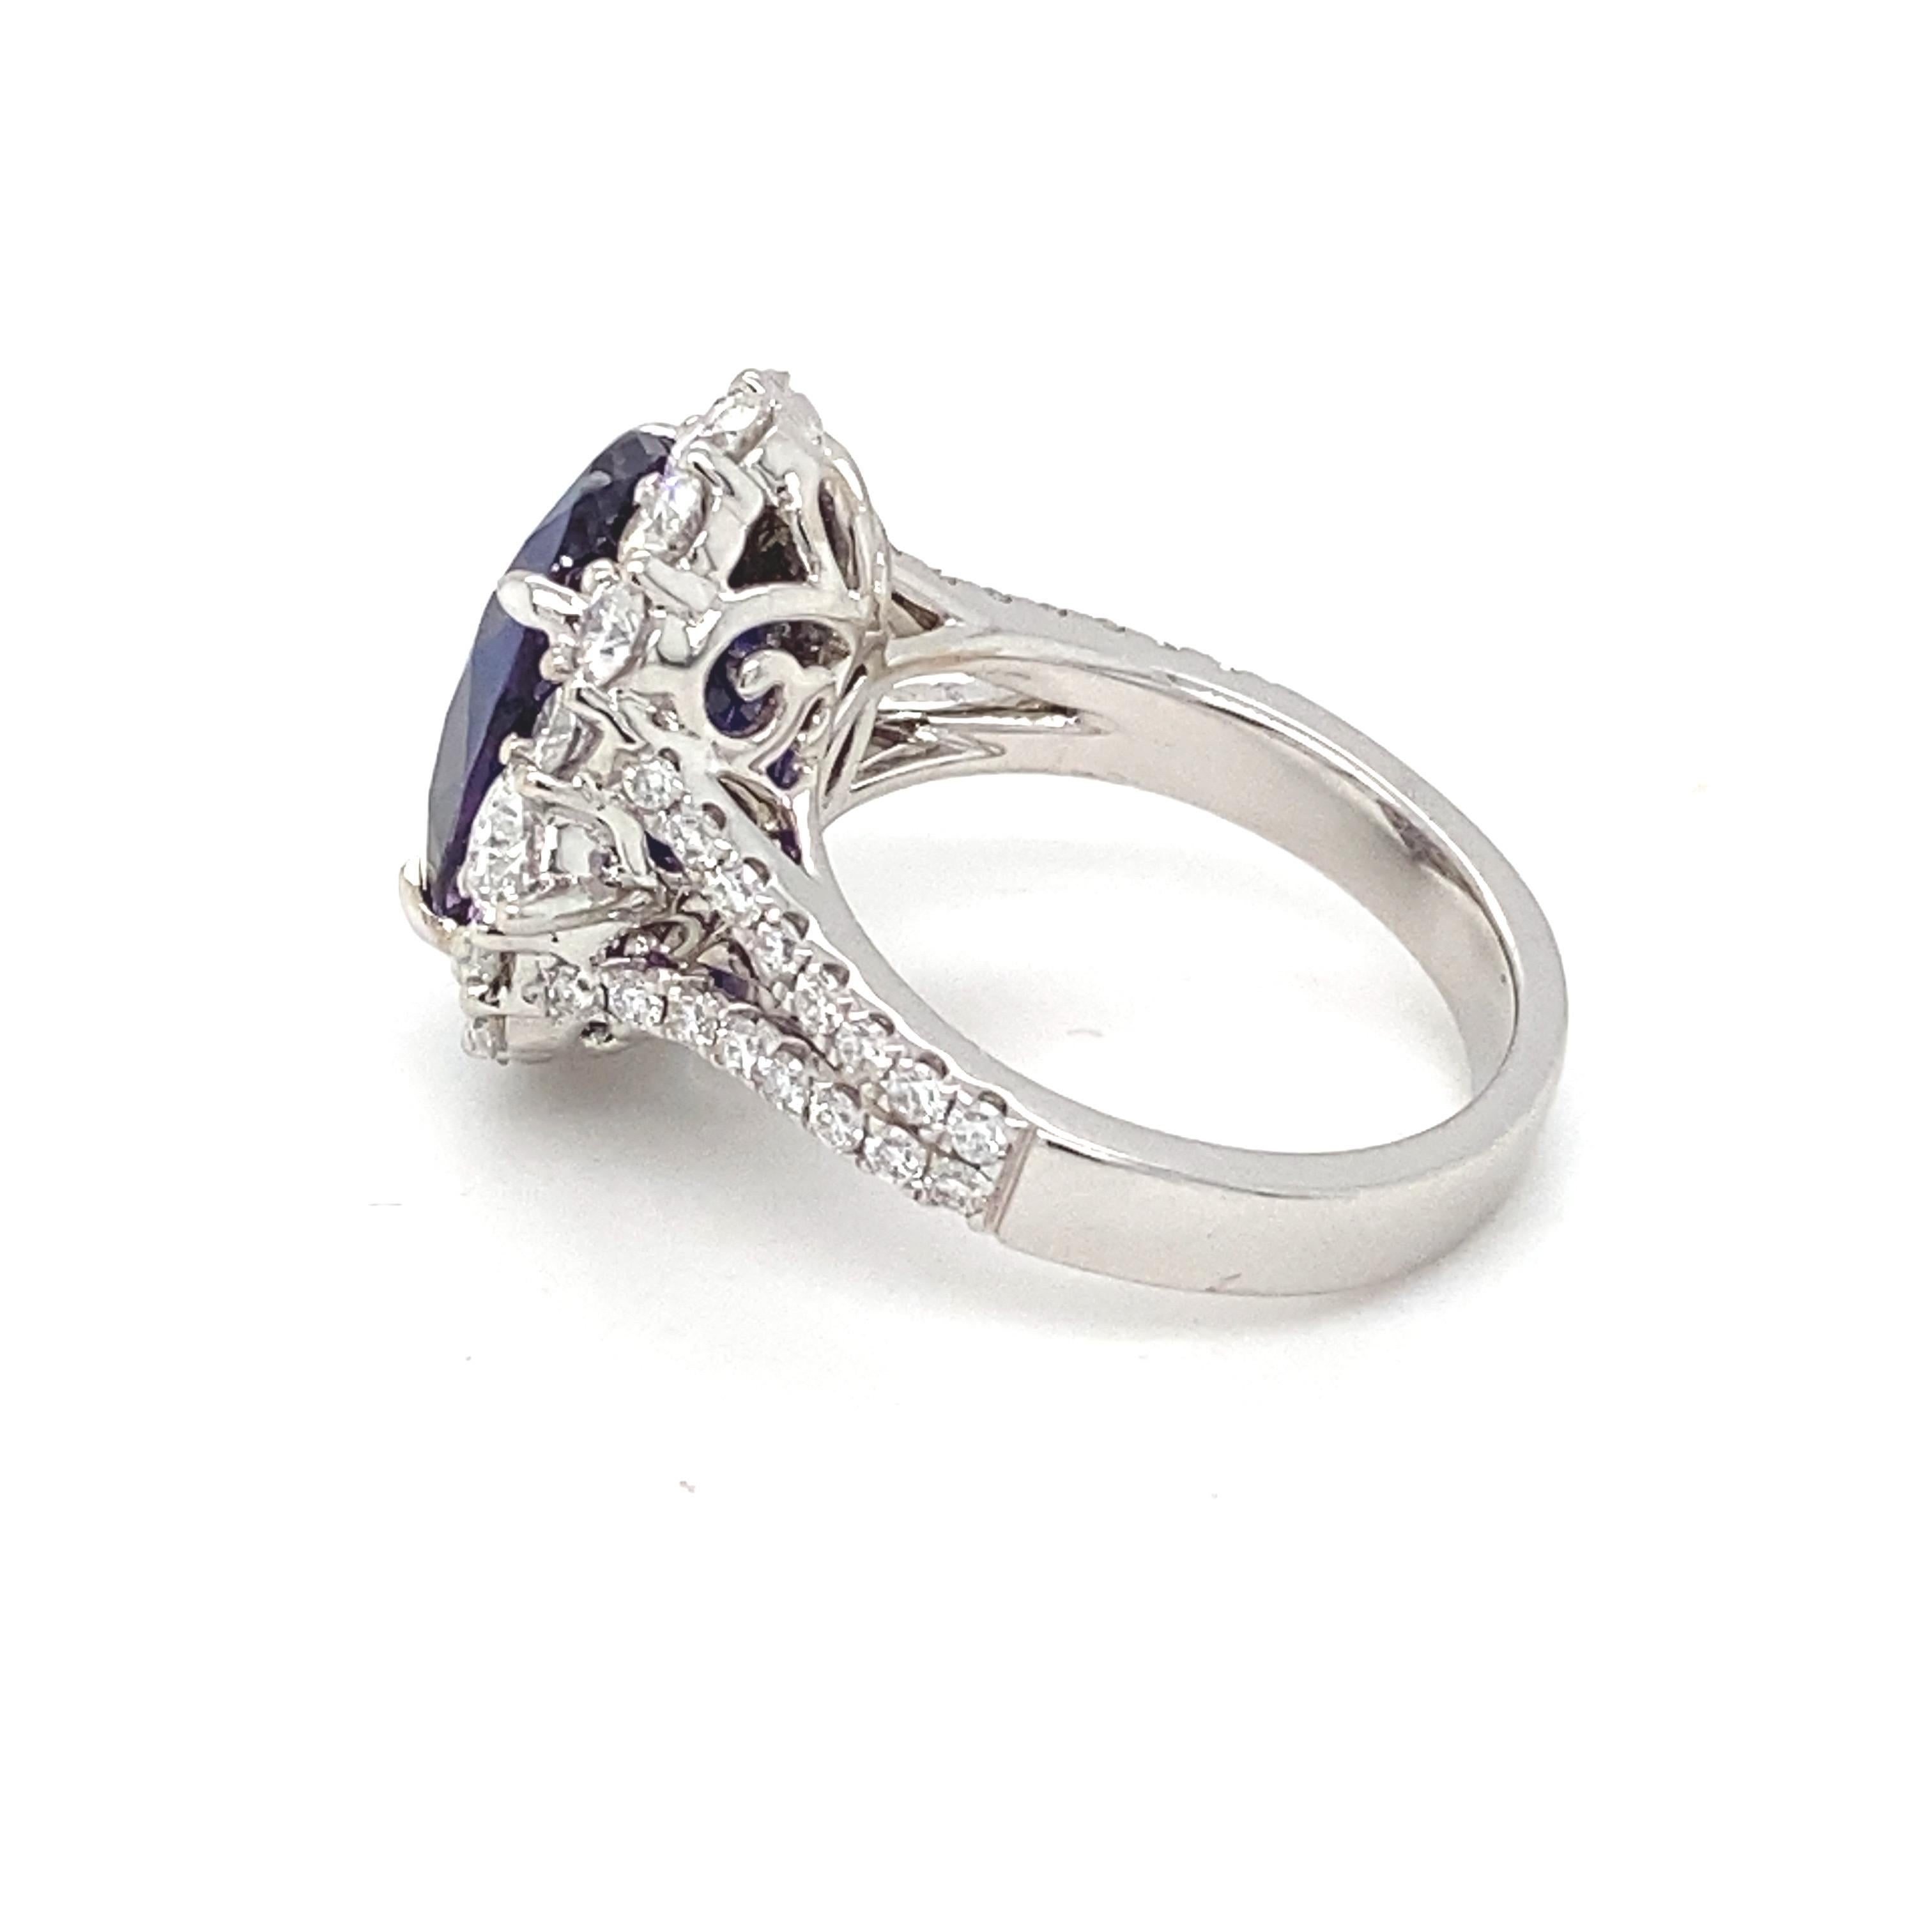 GIA Certified 10.04 Carat Violet Blue Oval Sapphire Diamond Engagement Ring  For Sale 7